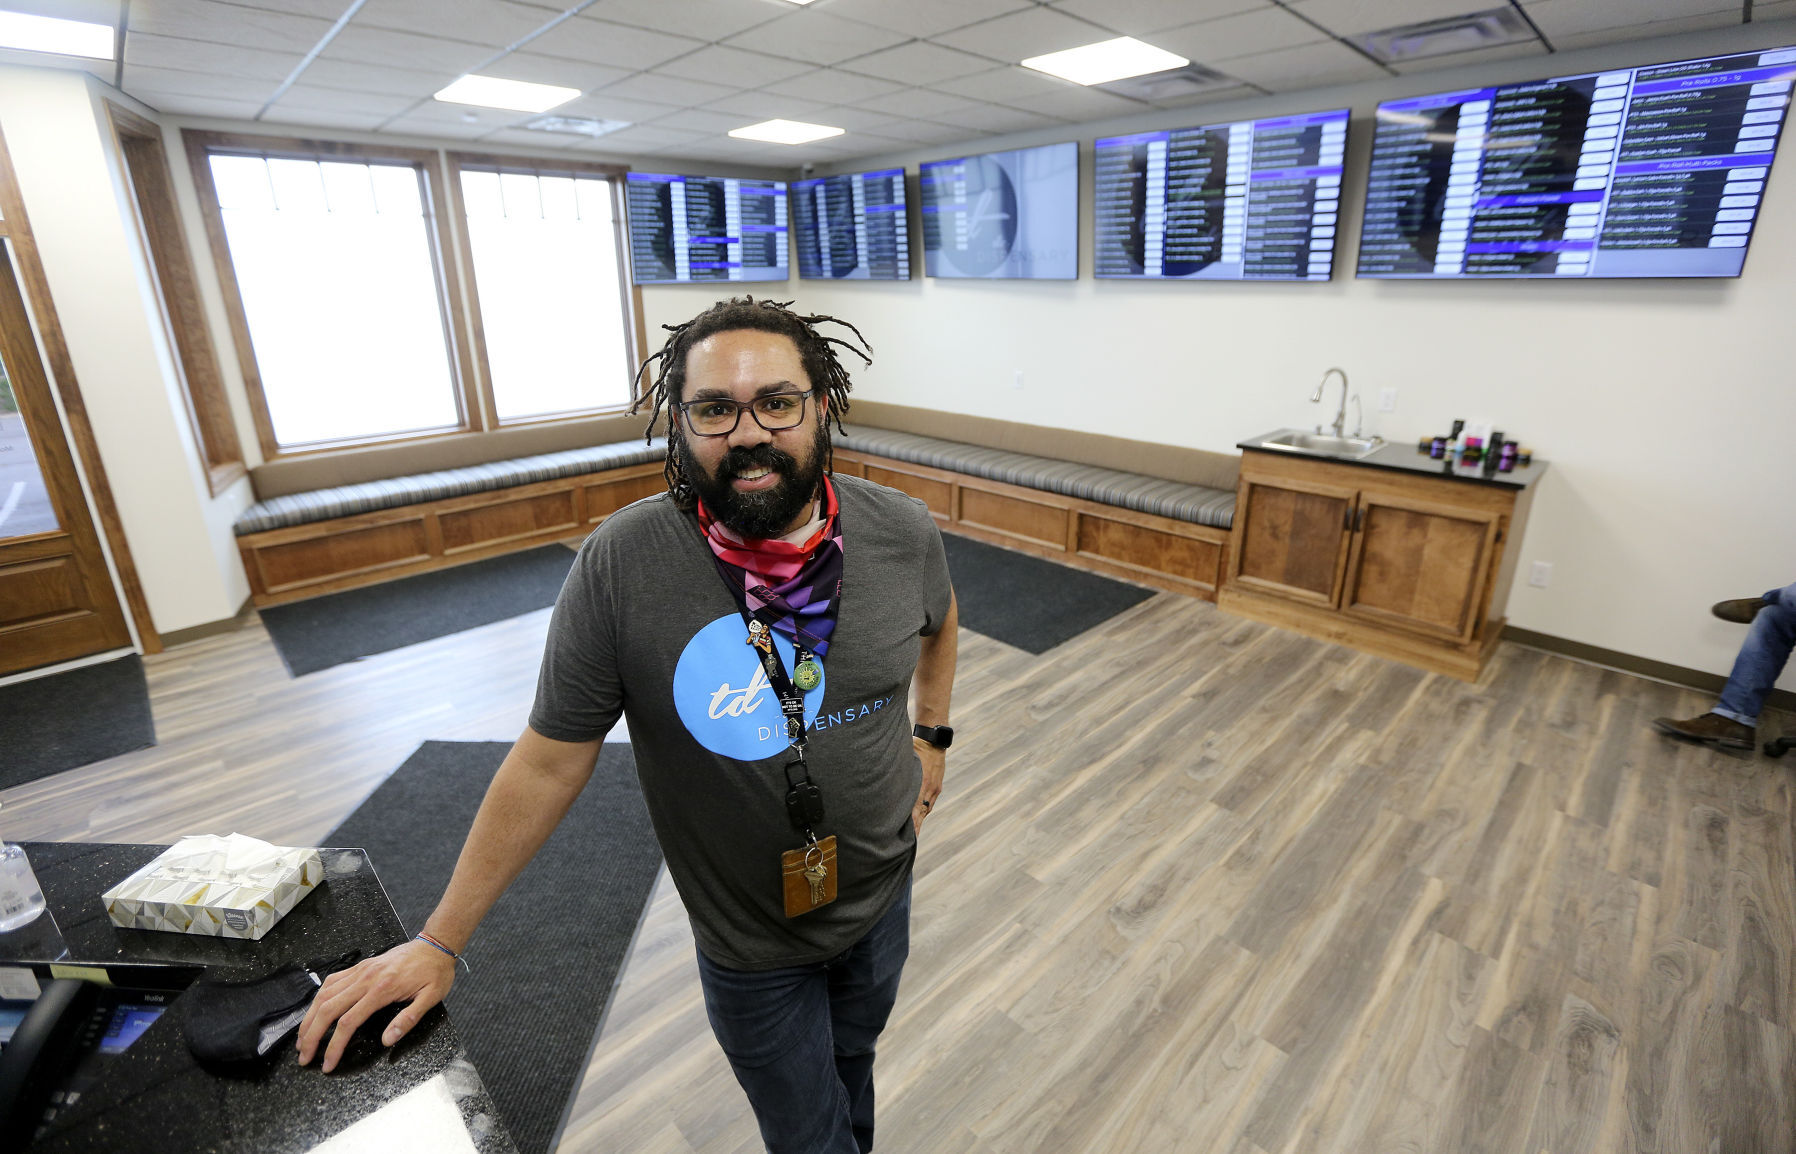 Joshua Perkins, general manager of The Dispensary East Dubuque, stands inside the store’s lobby. The business opened last Saturday. PHOTO CREDIT: Dave Kettering